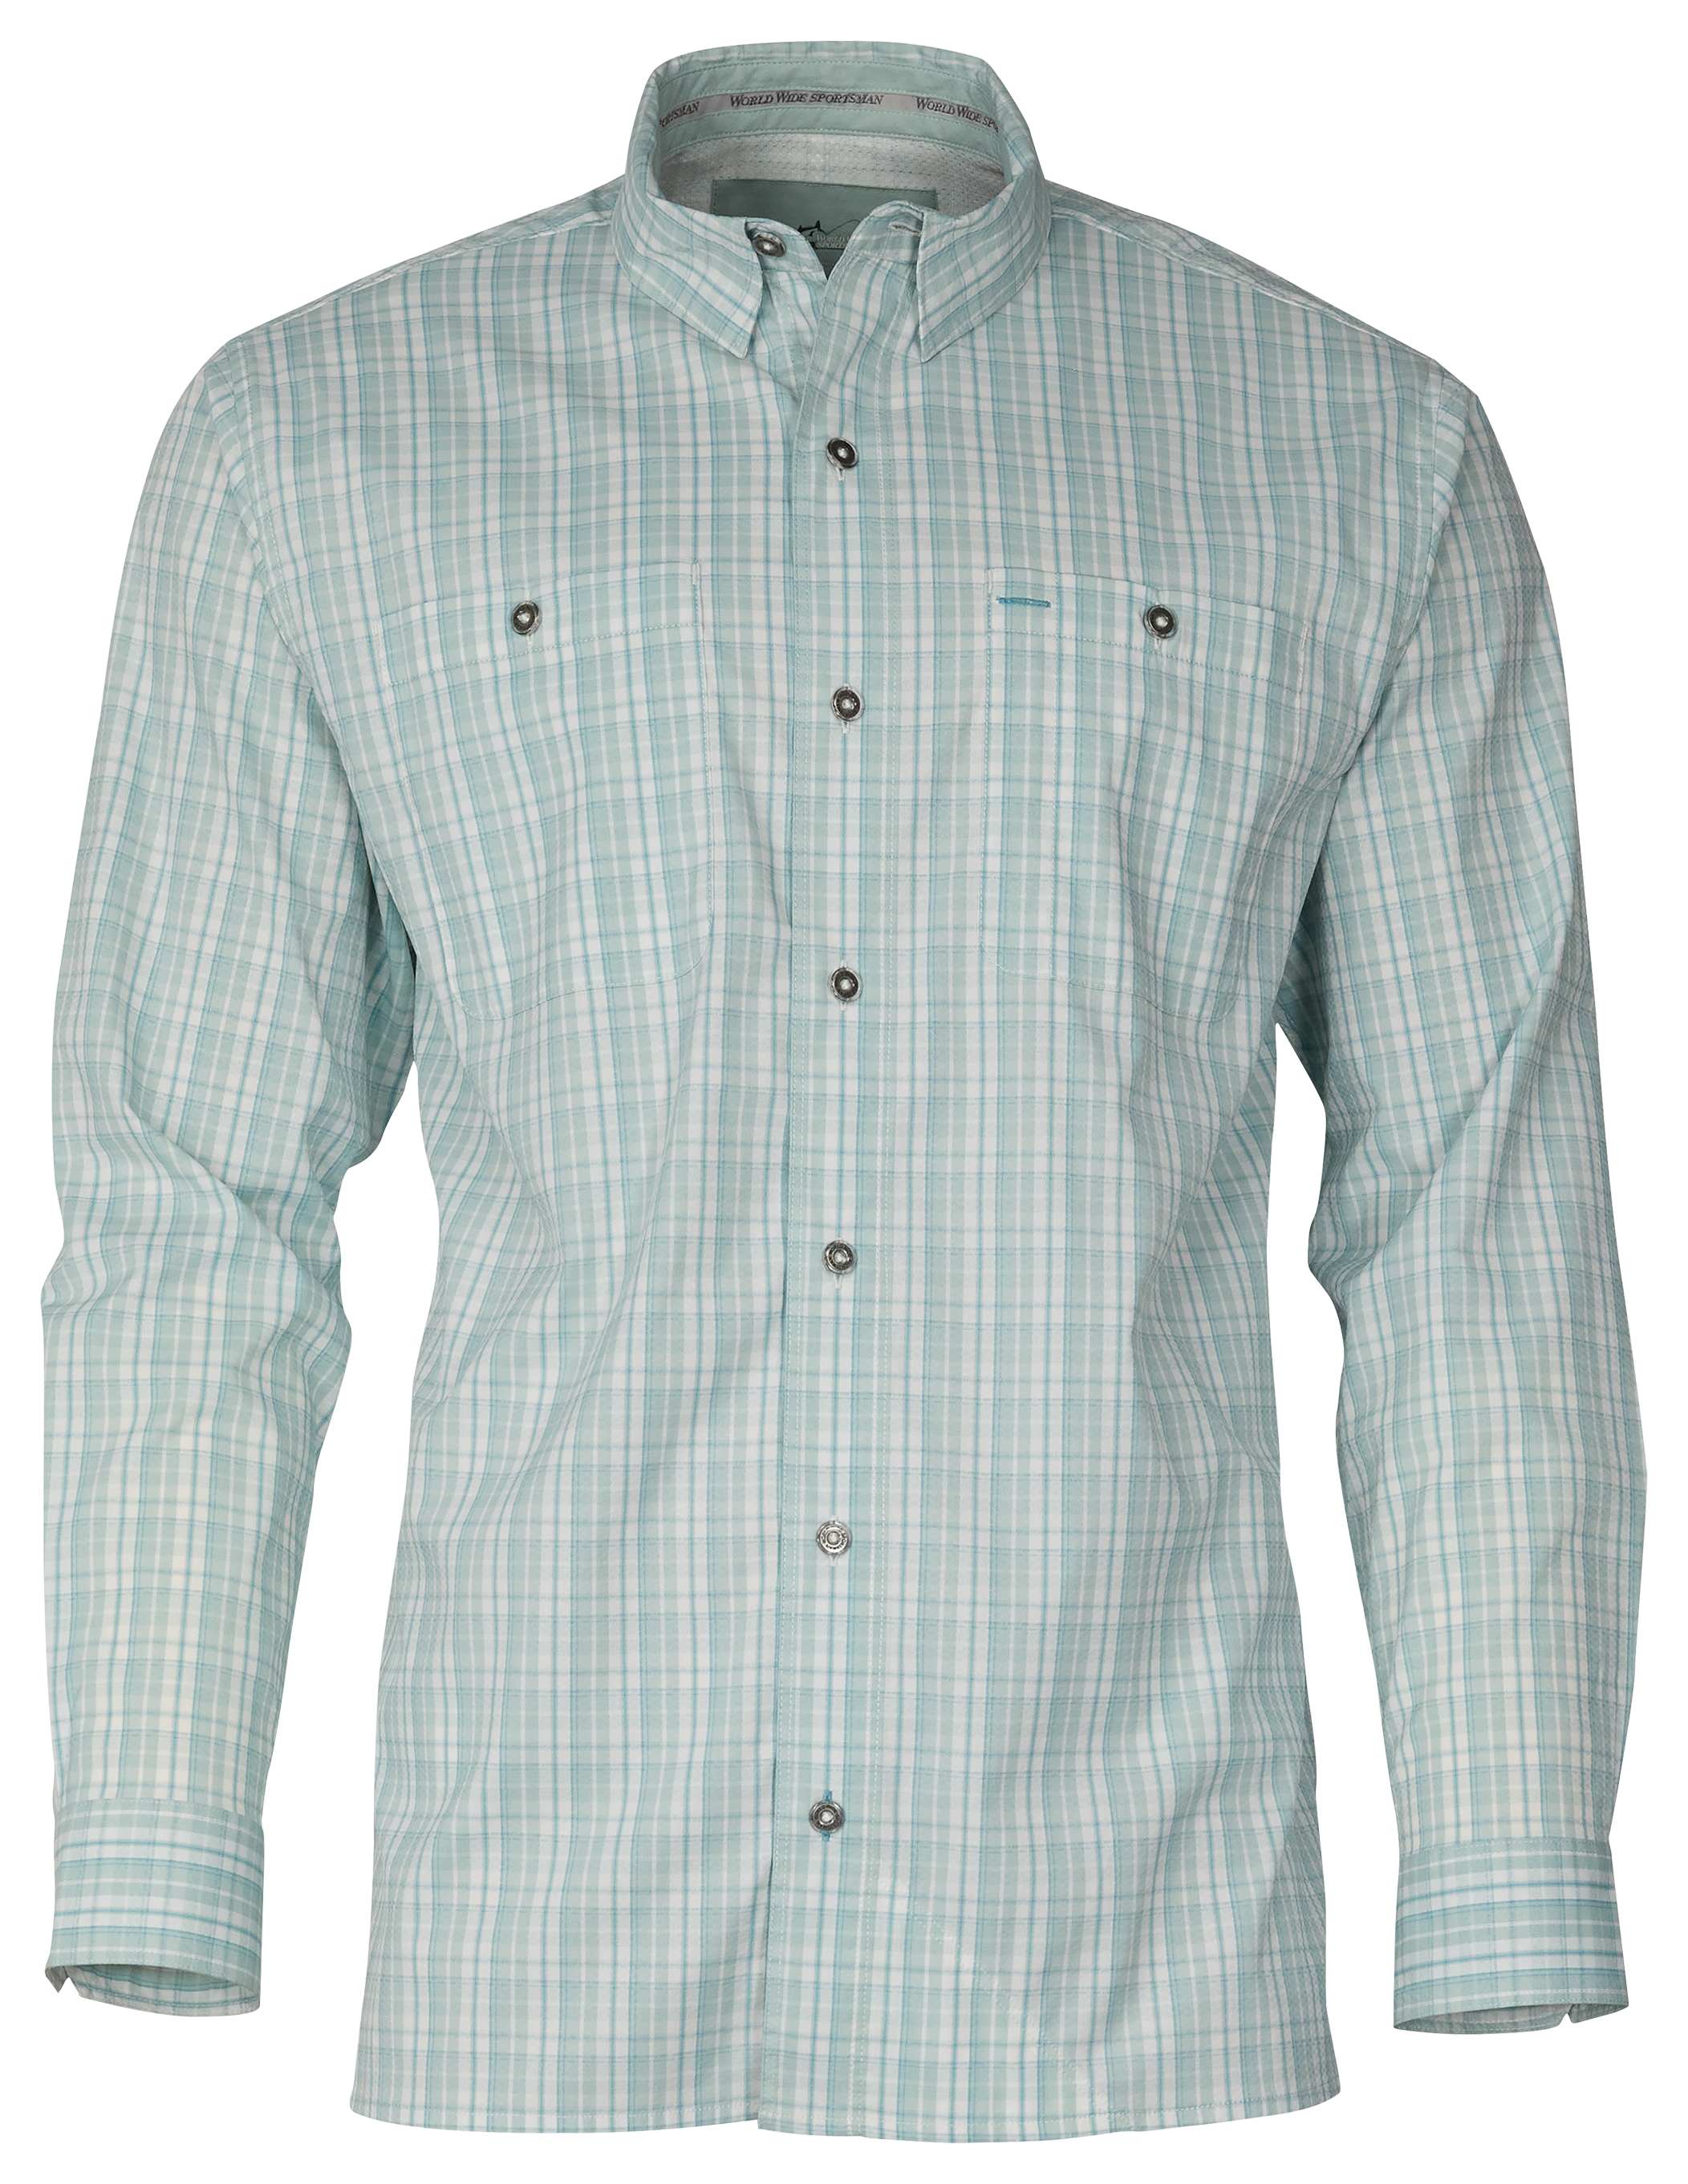 World Wide Sportsman 100% Cotton Fishing Shirts & Tops for sale